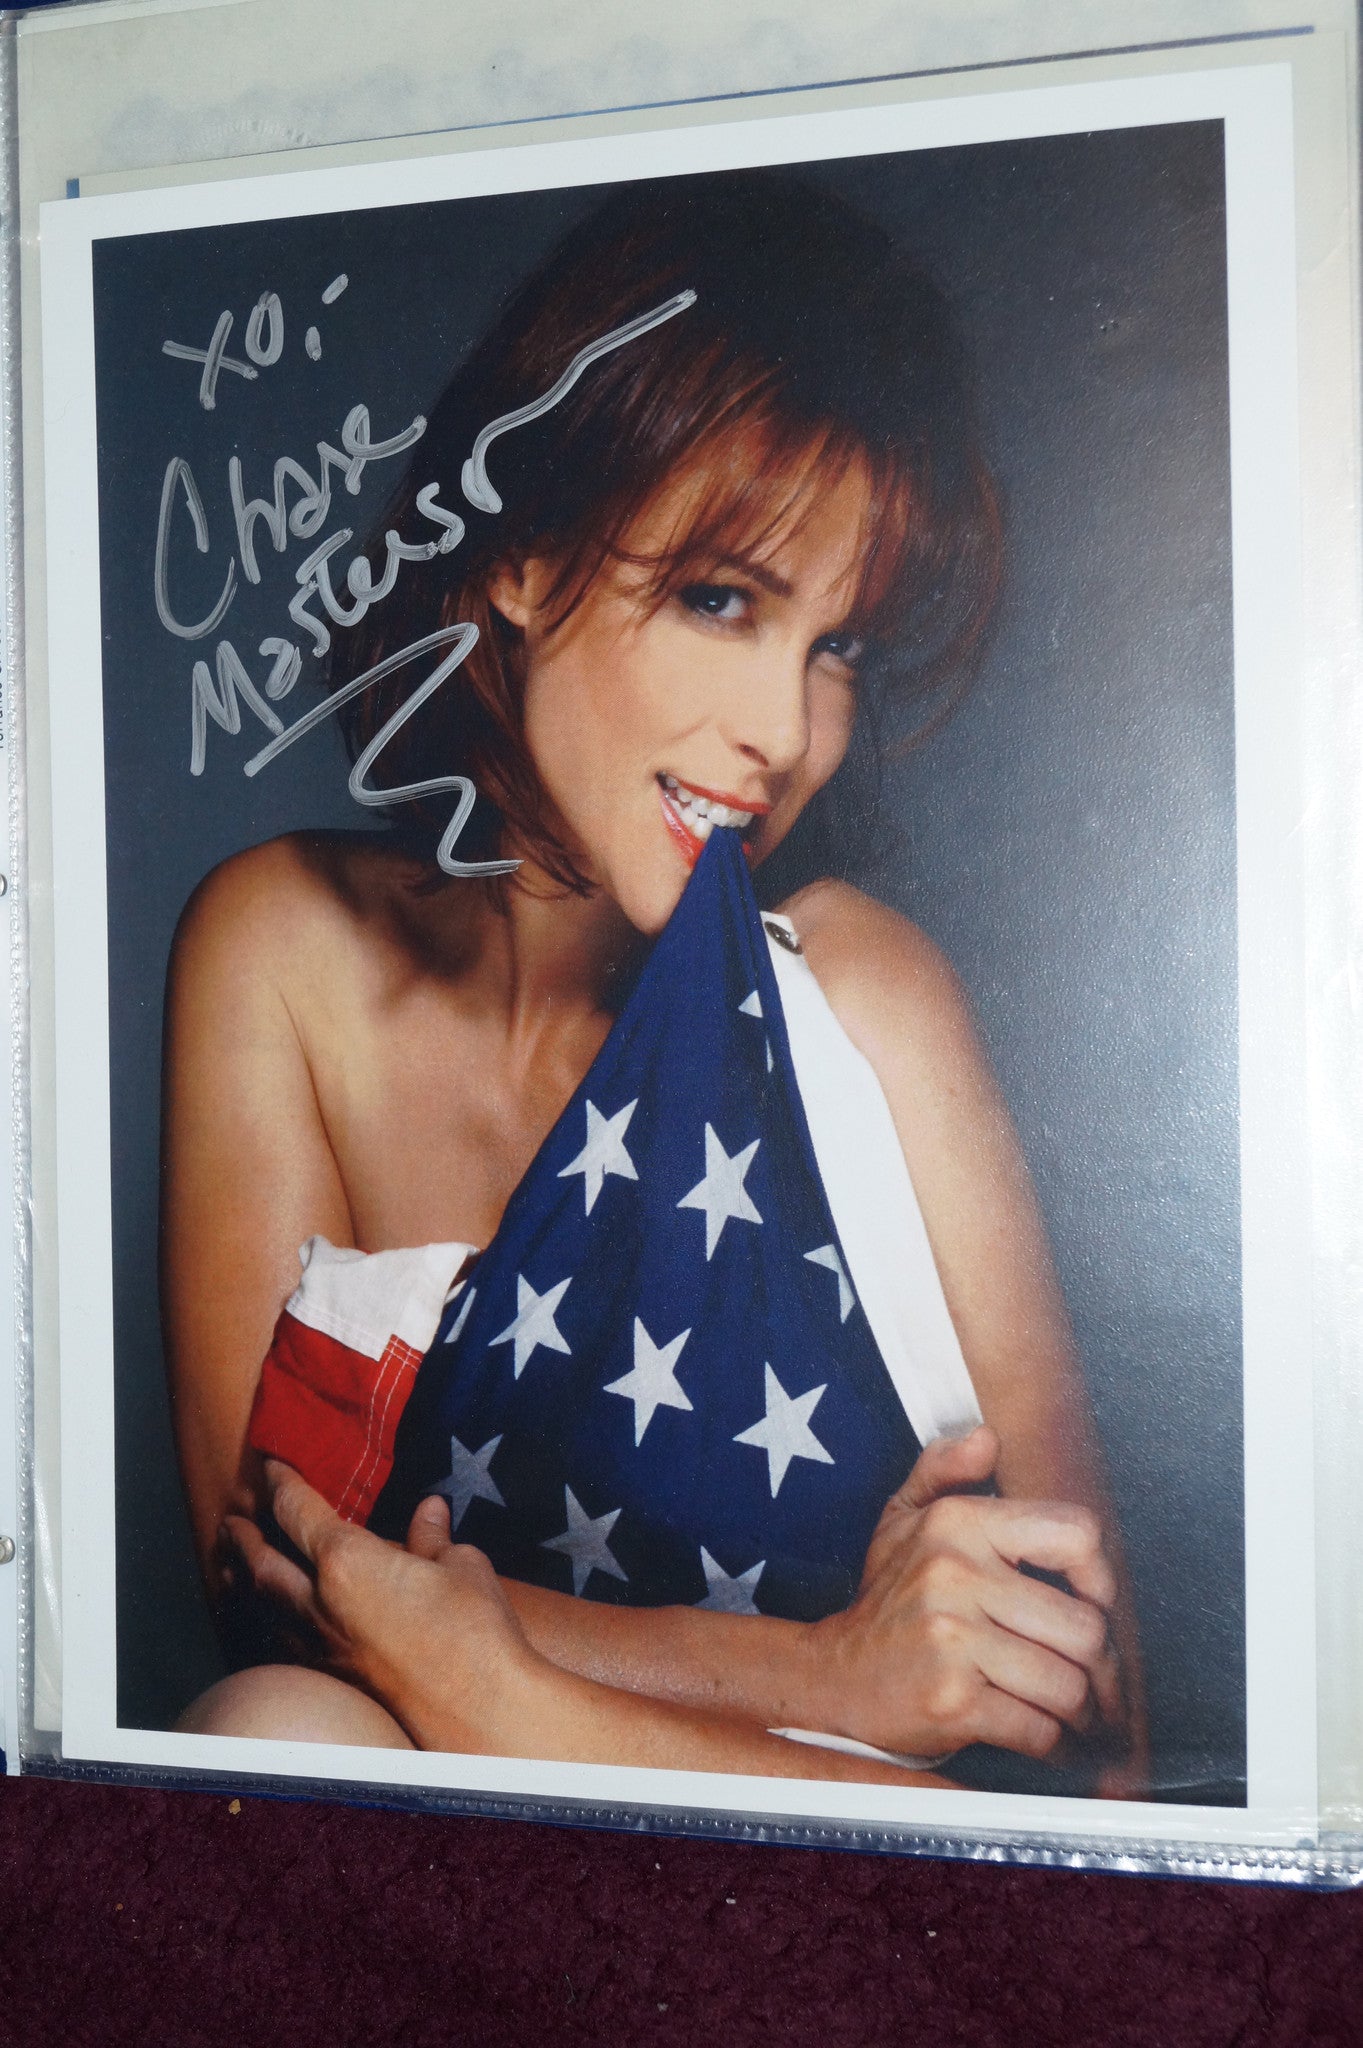 Autographed Picture "Chase Masterson"